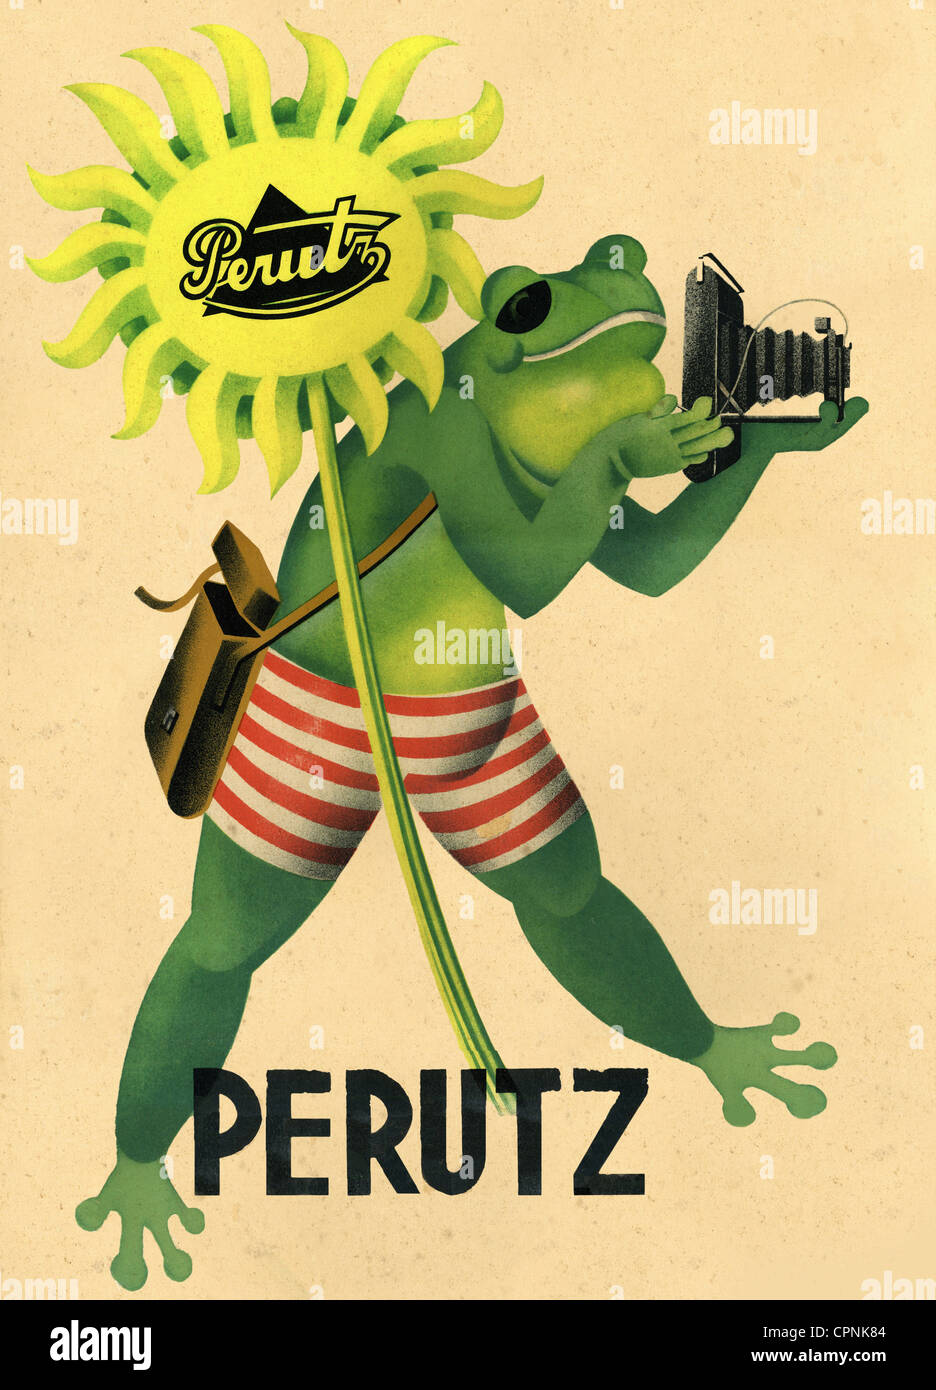 advertising,advertising sign for Perutz photographic film,frog is taking a photo,Perutz Photowerke GmbH,Munich,Perutz was taken over by Agfa in 1964,Germany,circa 1956,joking,funny,advertising characters,advertising character,rich in tradition brand,German photographic industry,photochemical industry,movie,photo camera,analogue,analog,analogue photograph,Perutz Photo Factory,humor,humour,joke,jokes,frolic,comical,comic,illustration,advertising sign,advertising paperboard,advertising,business company,economy,1950s,50s,trade na,Additional-Rights-Clearences-Not Available Stock Photo